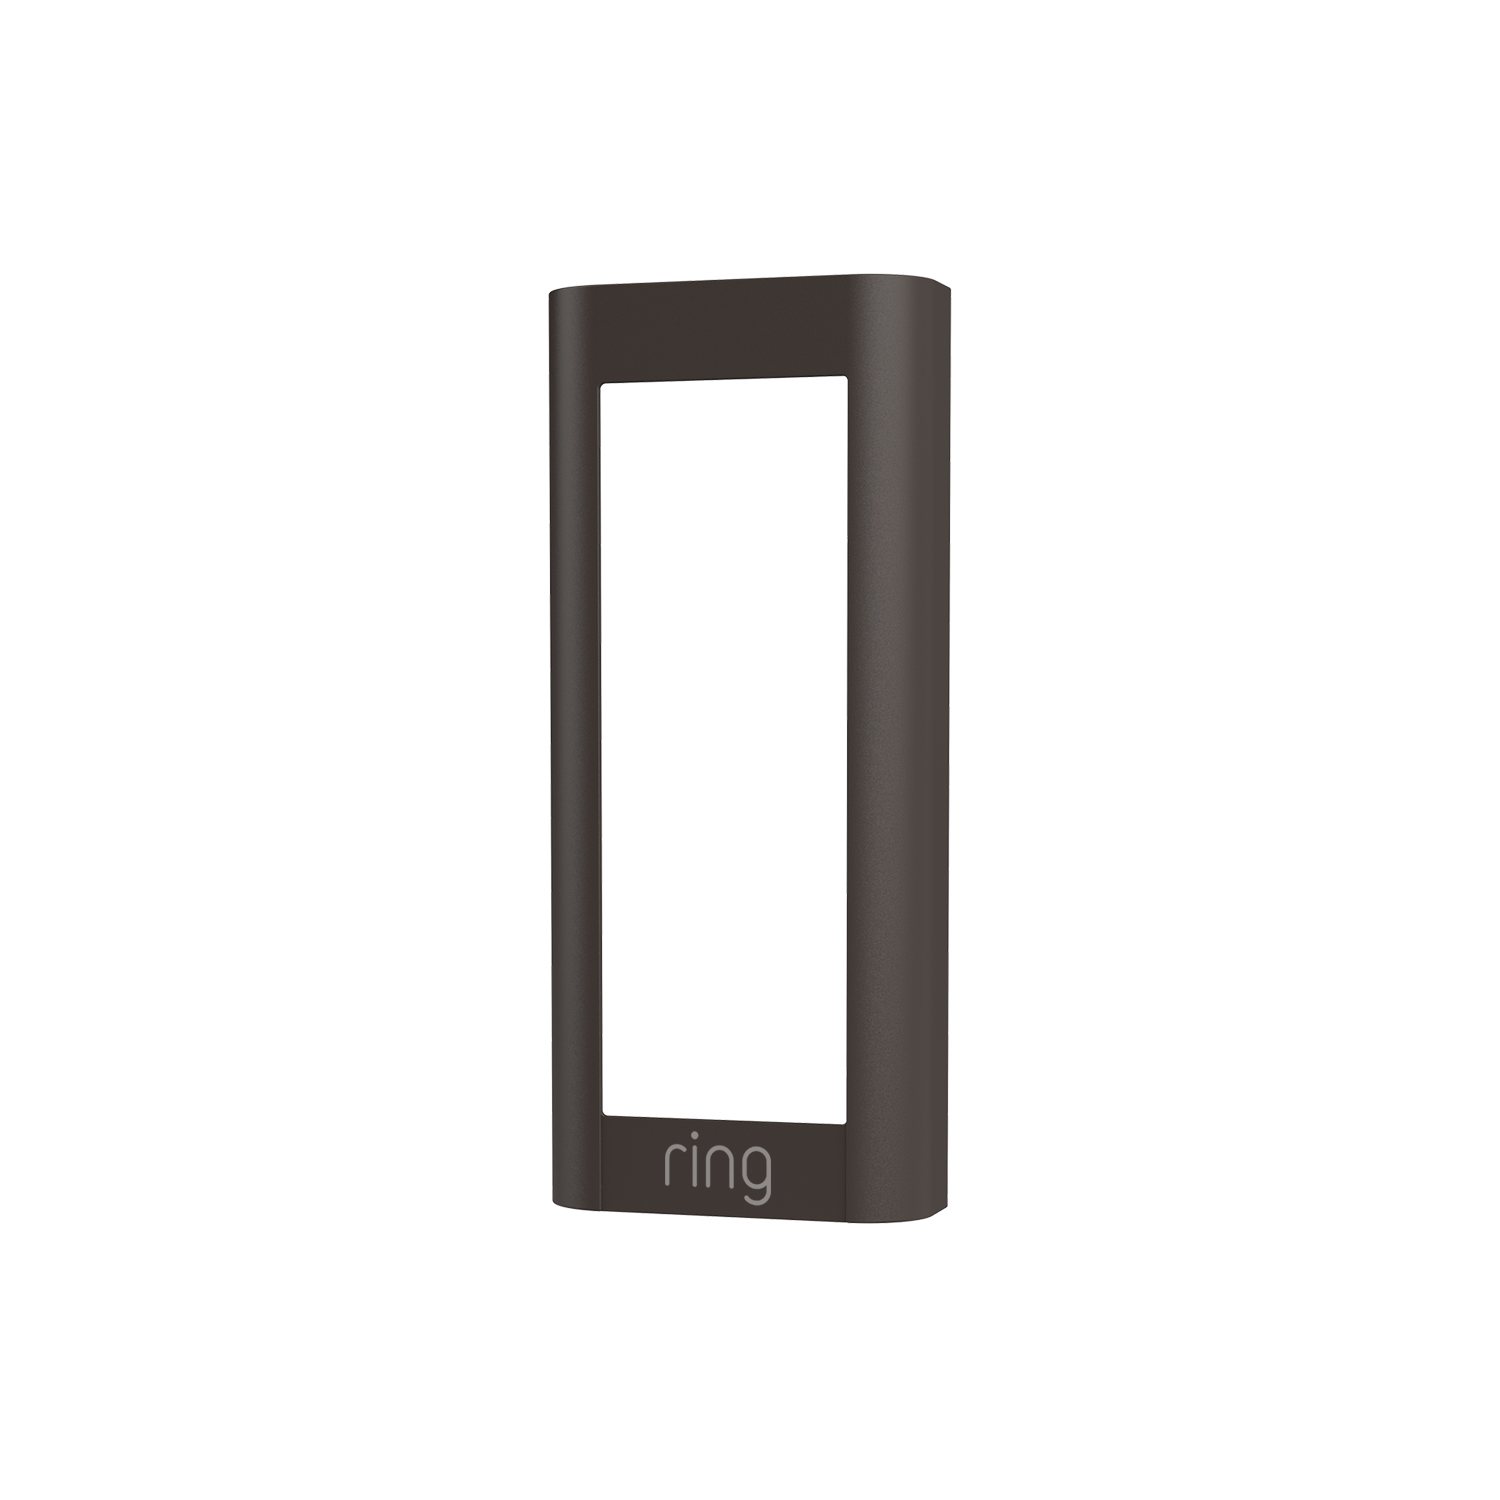 Interchangeable Faceplate (for Wired Doorbell Pro (Video Doorbell Pro 2)) - Mocha Brown:Interchangeable Faceplate (for Wired Doorbell Pro (Video Doorbell Pro 2))